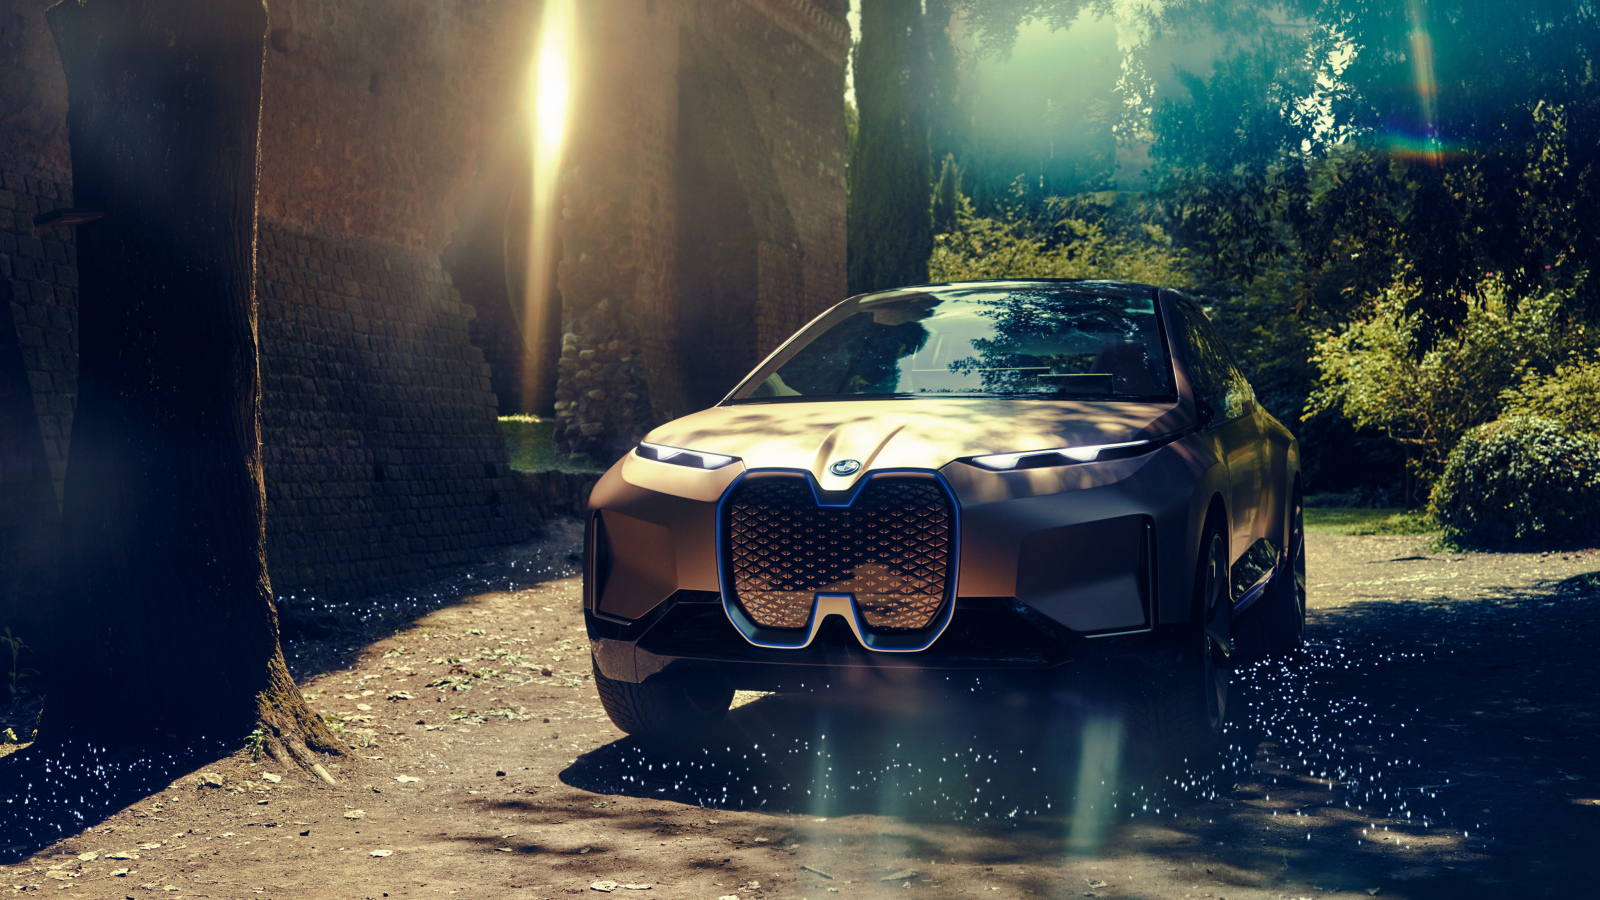 BMW Vision iNEXT SUV rides through the forest